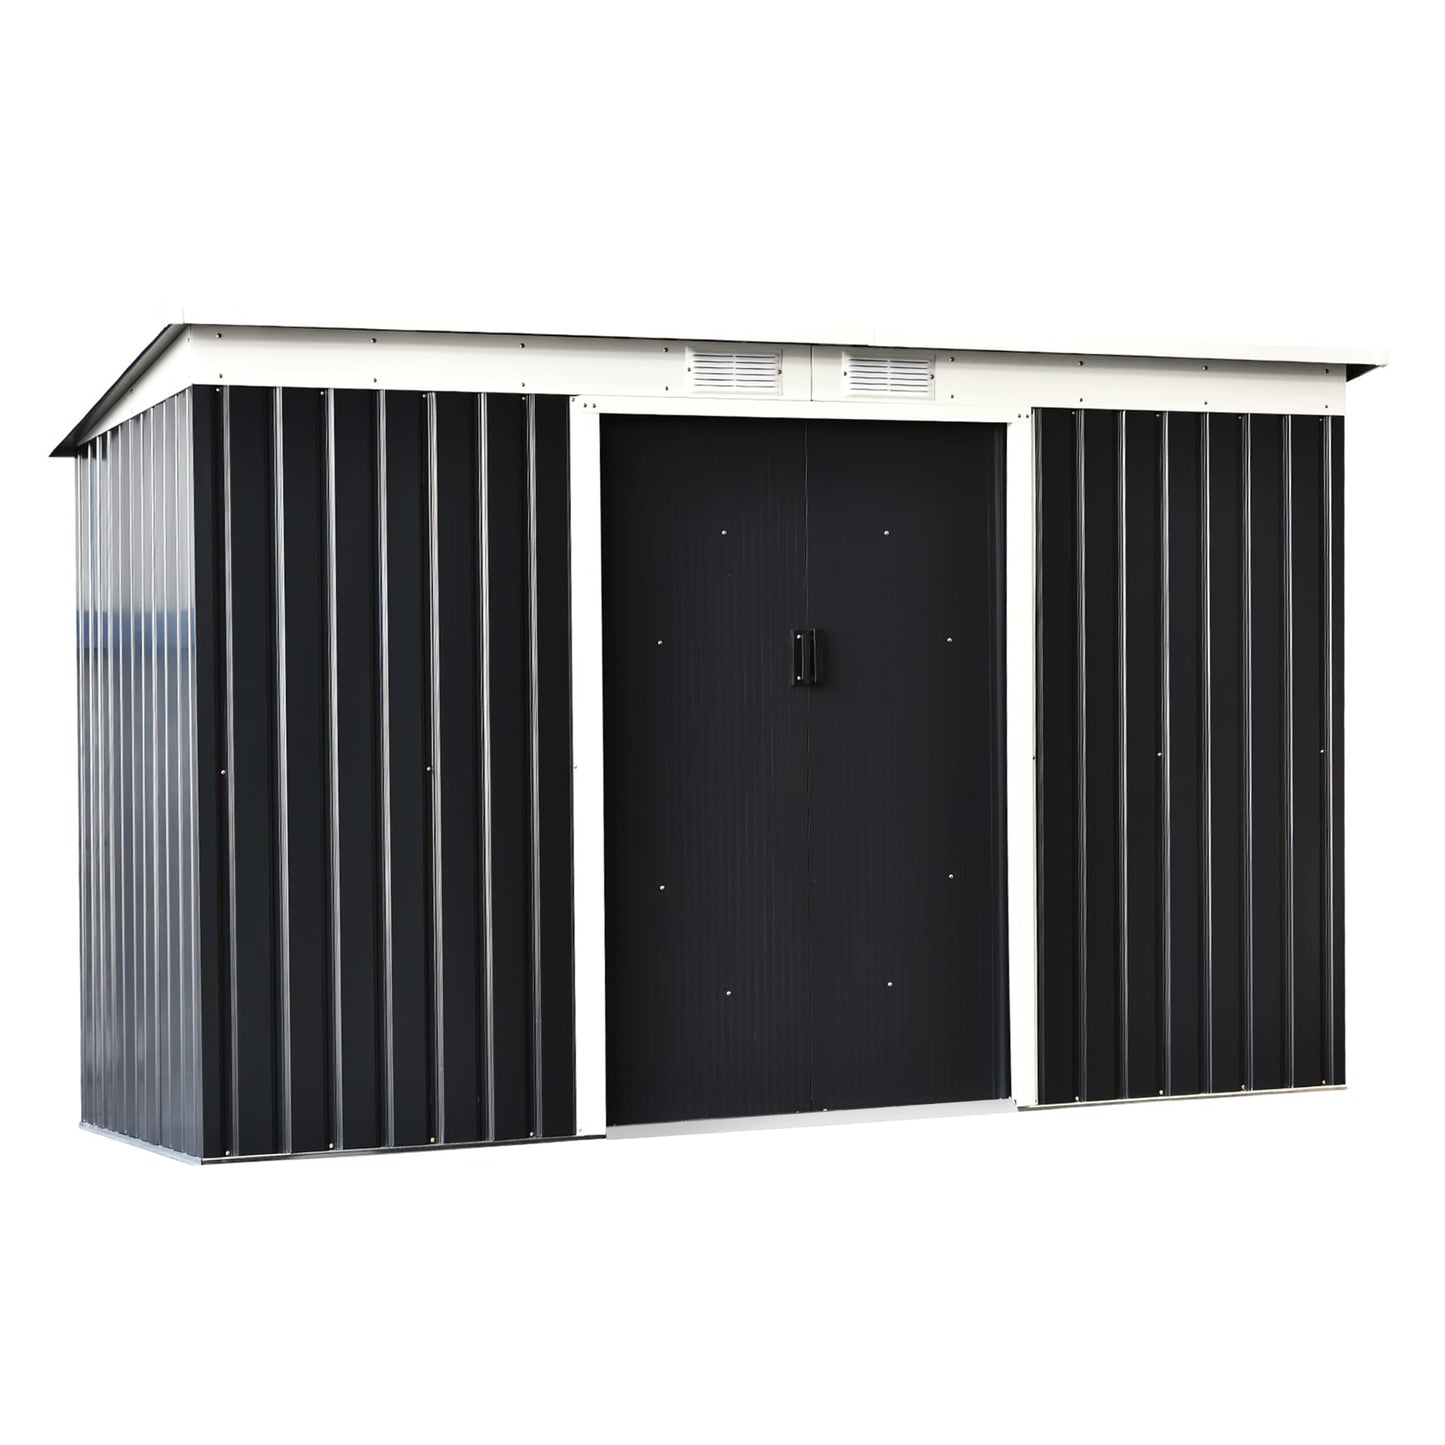 Outsunny 9' x 4' Outdoor Storage Shed, Galvanized Metal Utility Garden Tool House, 2 Vents and Lockable Door for Backyard, Bike, Patio, Garage, Lawn,